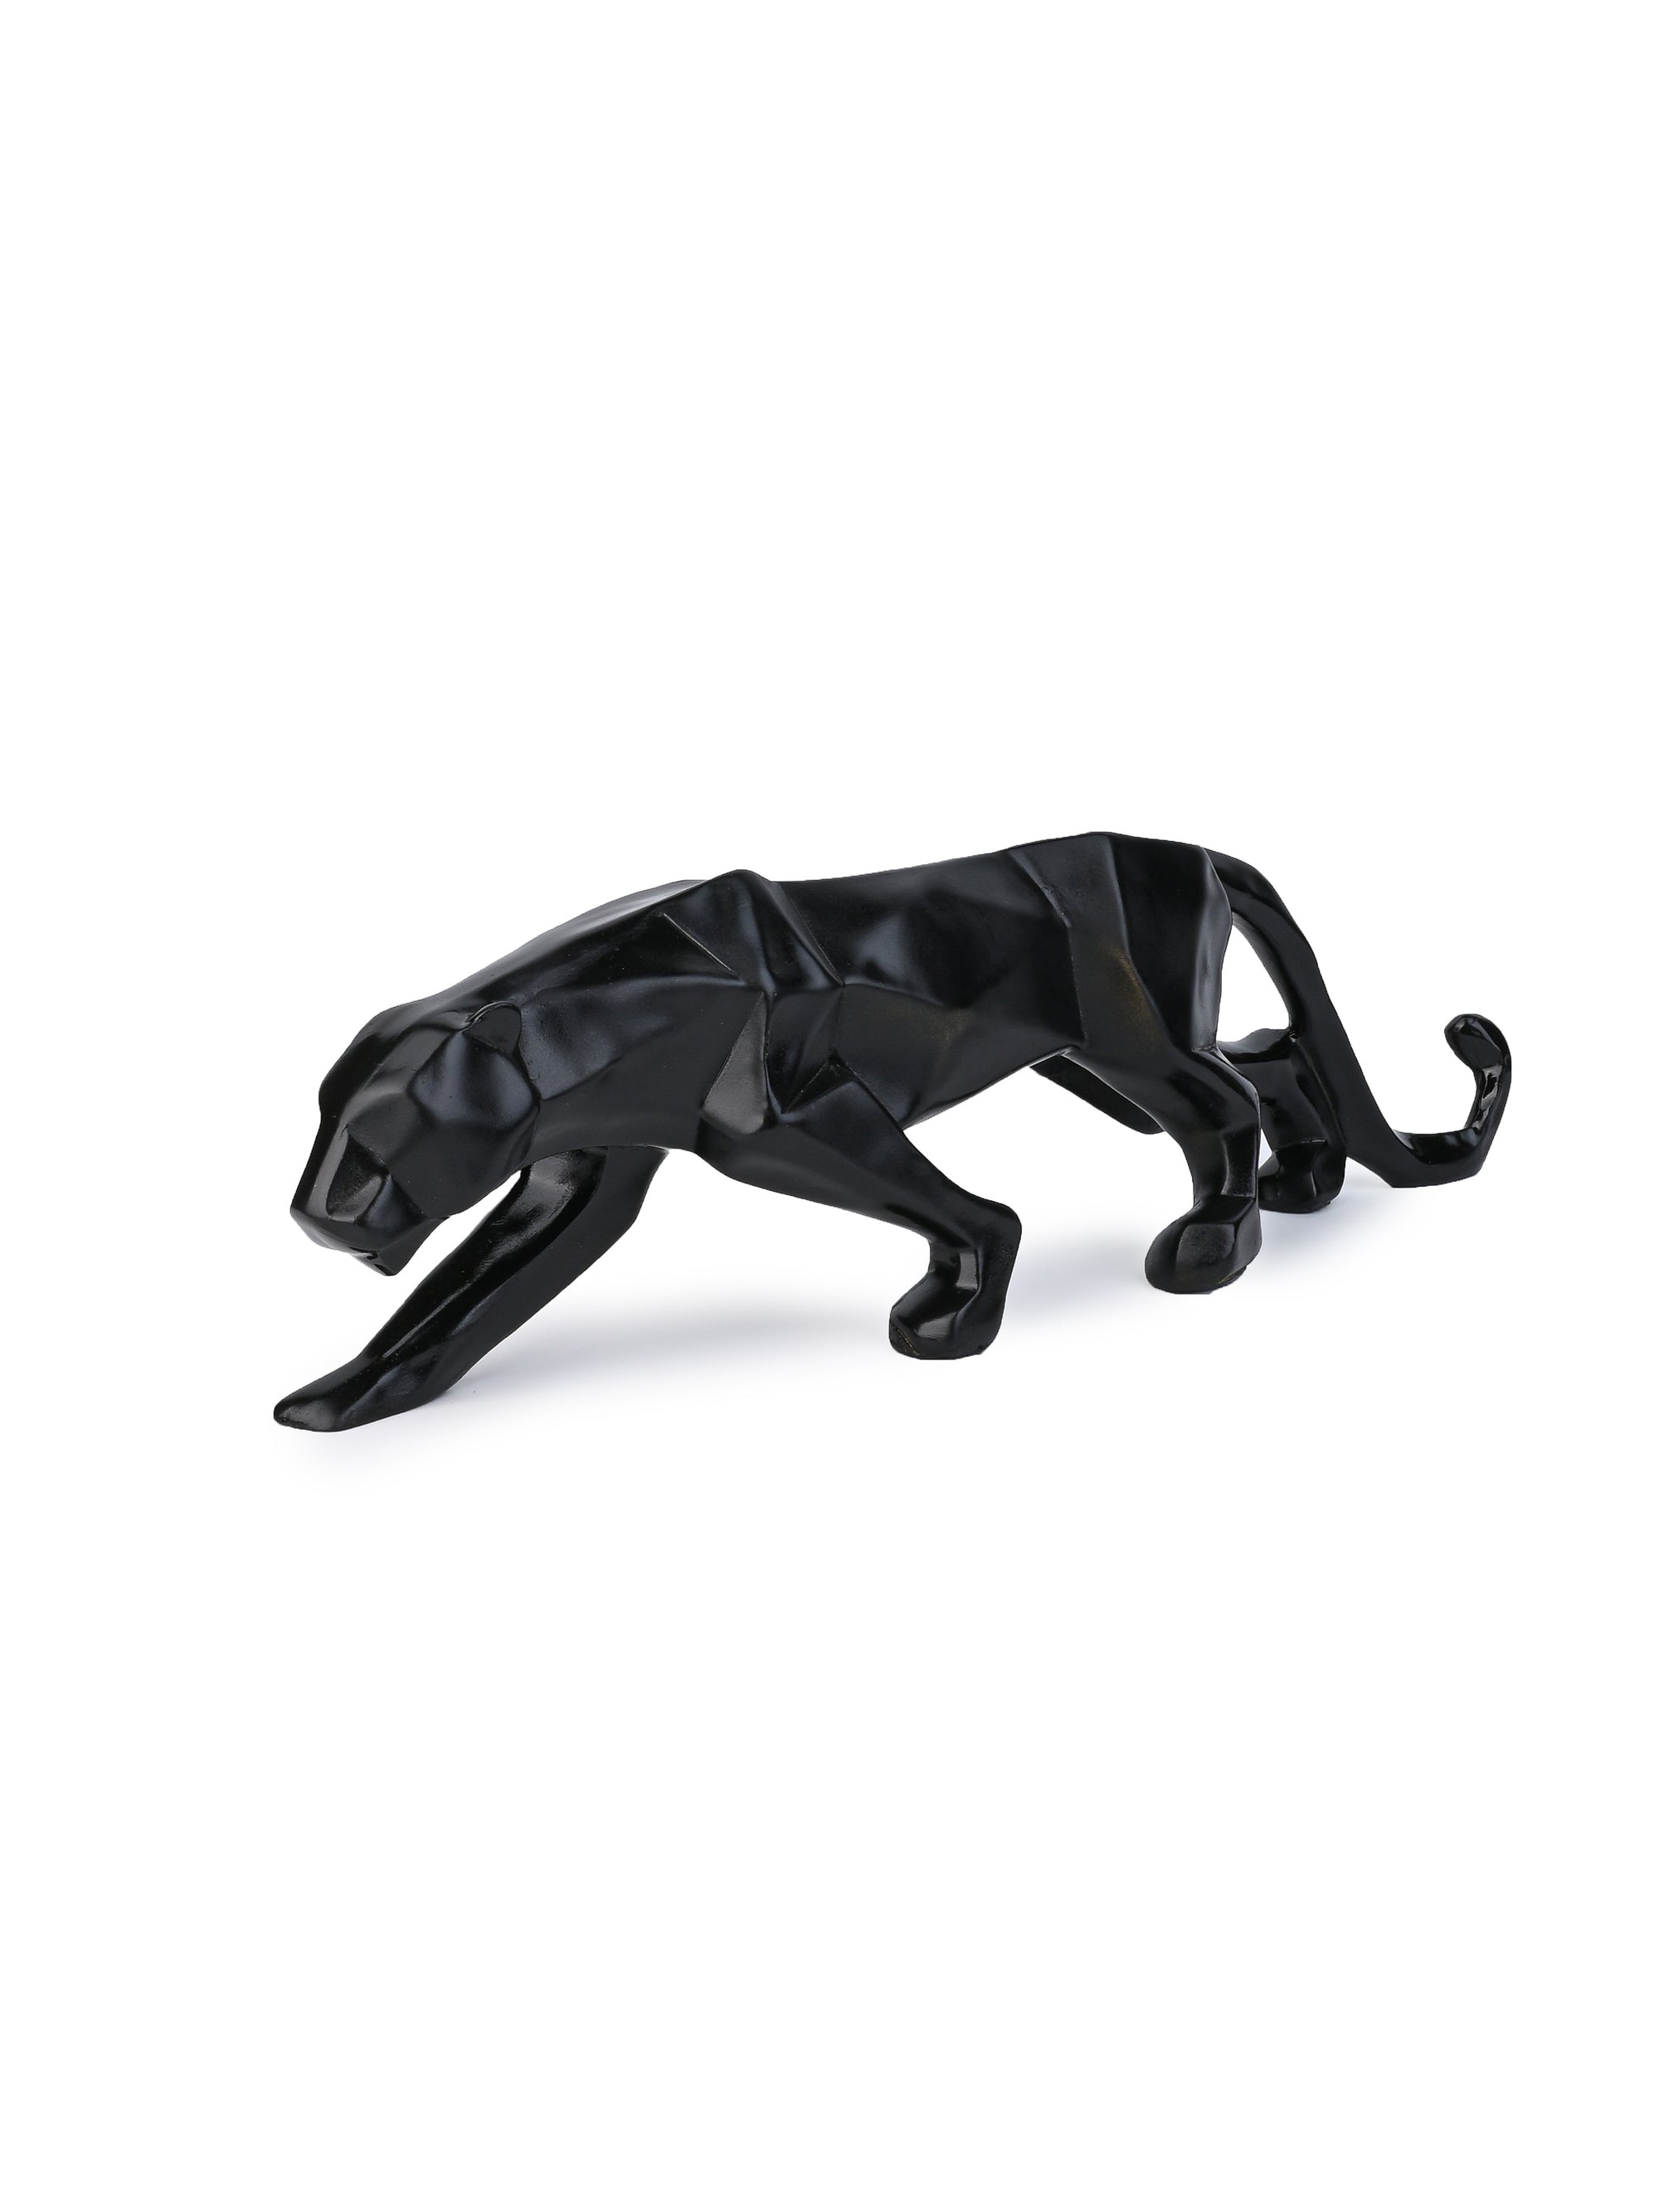 Geometric Design Black Panther Decorative Showpiece Crafted from Resin - 15 inches